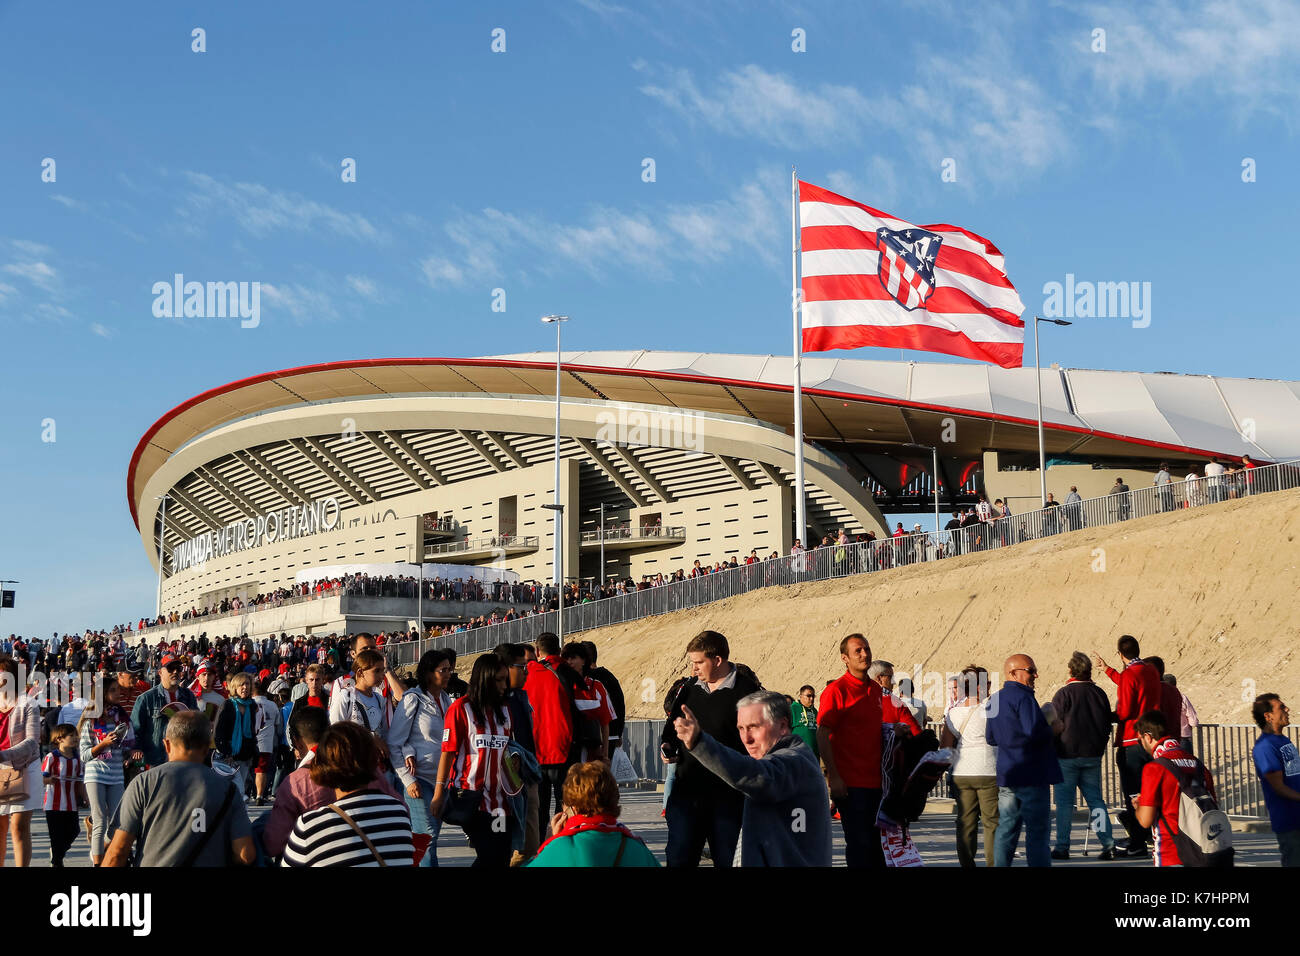 Madrid, Spain. 17th September, 2017. LaLiga match between Atletico de Madrid and Malaga CF at the Wanda Metropolitano Stadium on the day of its first official match. © ABEL F. ROS/Alamy Live News Stock Photo